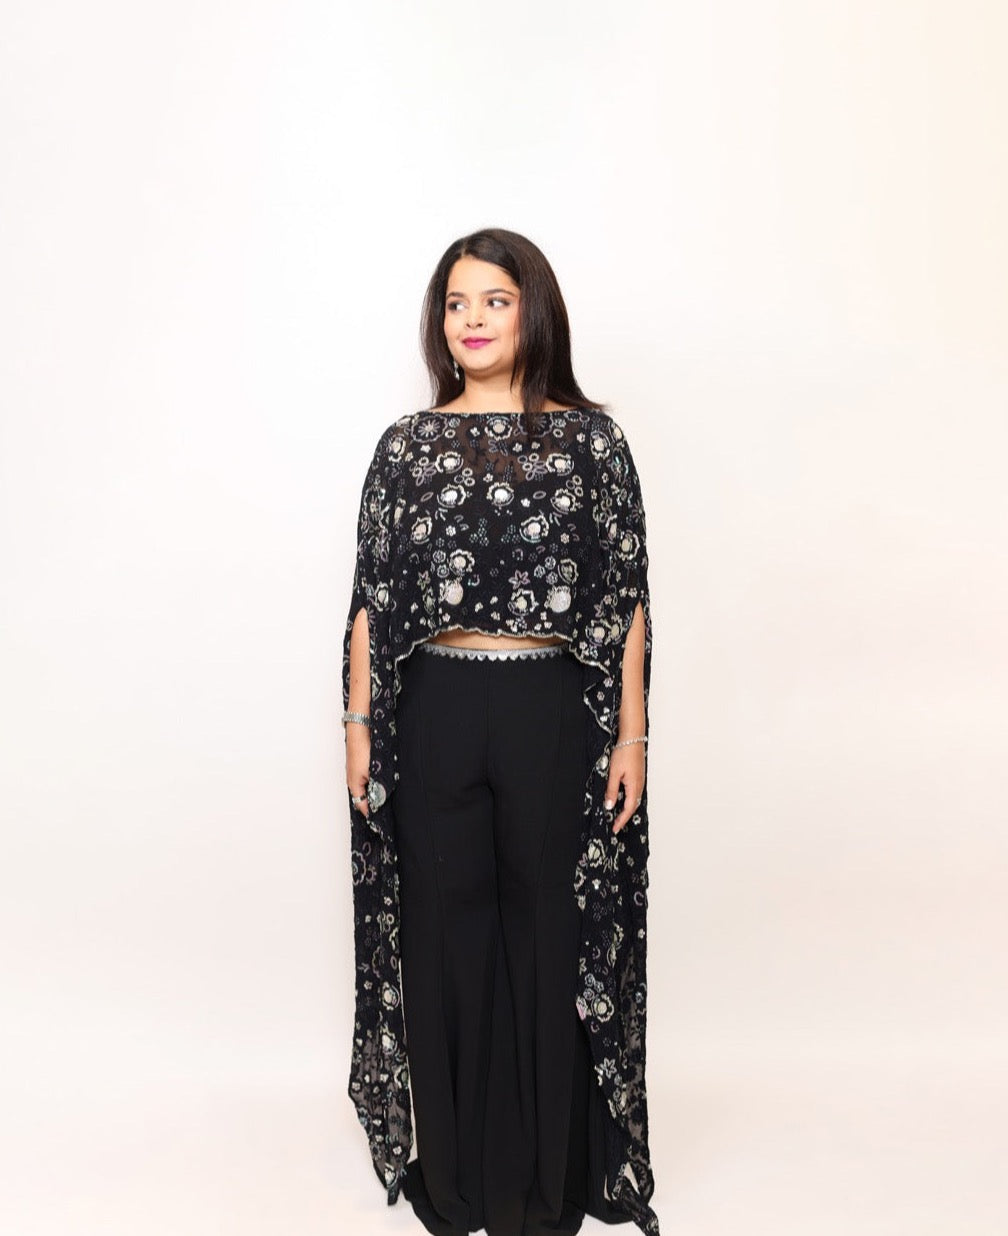 Girlboss Black Embroidered Party Co-ord Set for Women